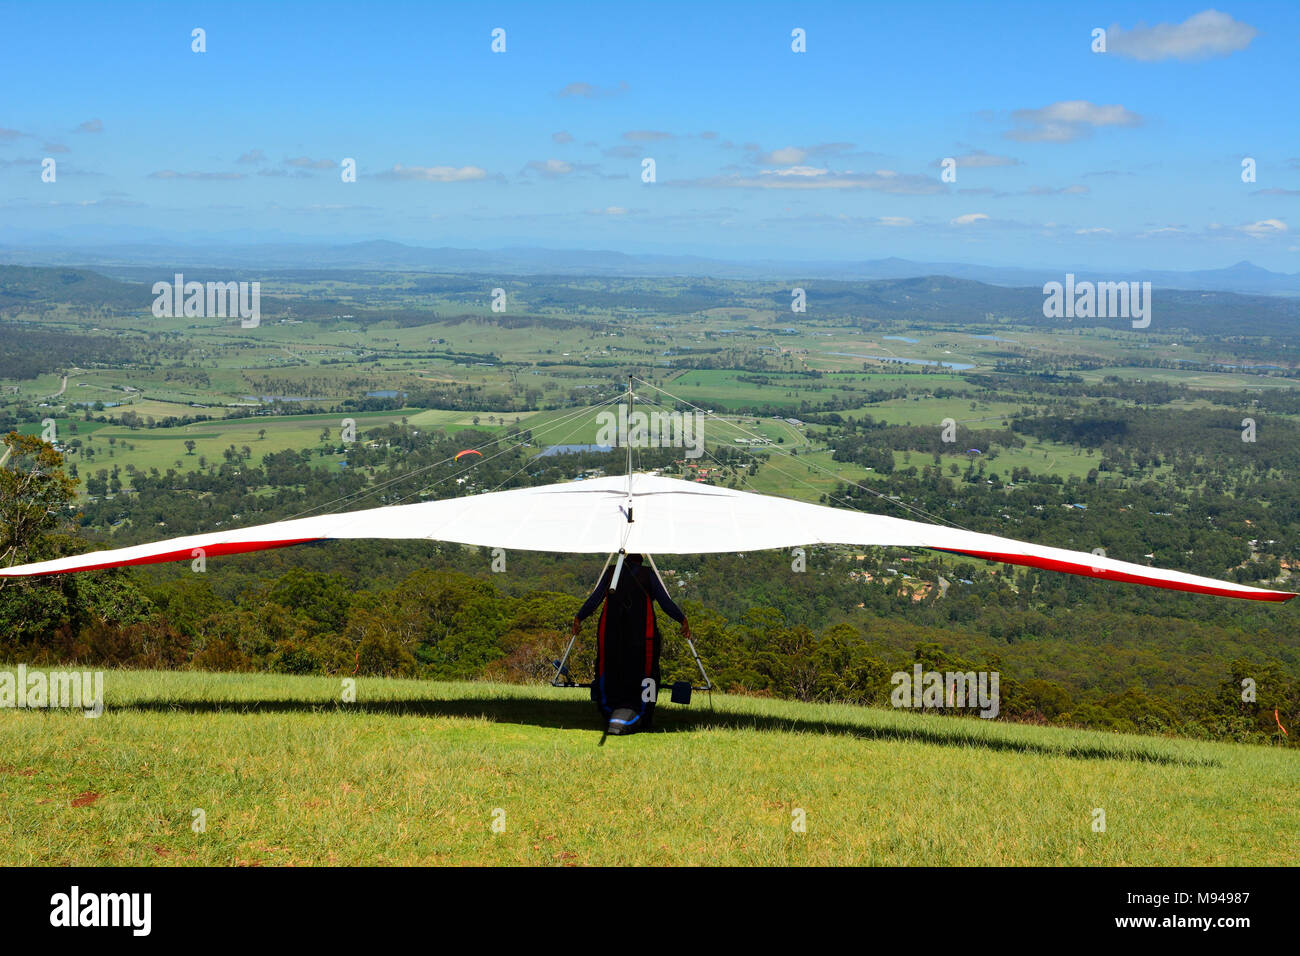 Hang-glider taking off a mountain top in Australia. Stock Photo